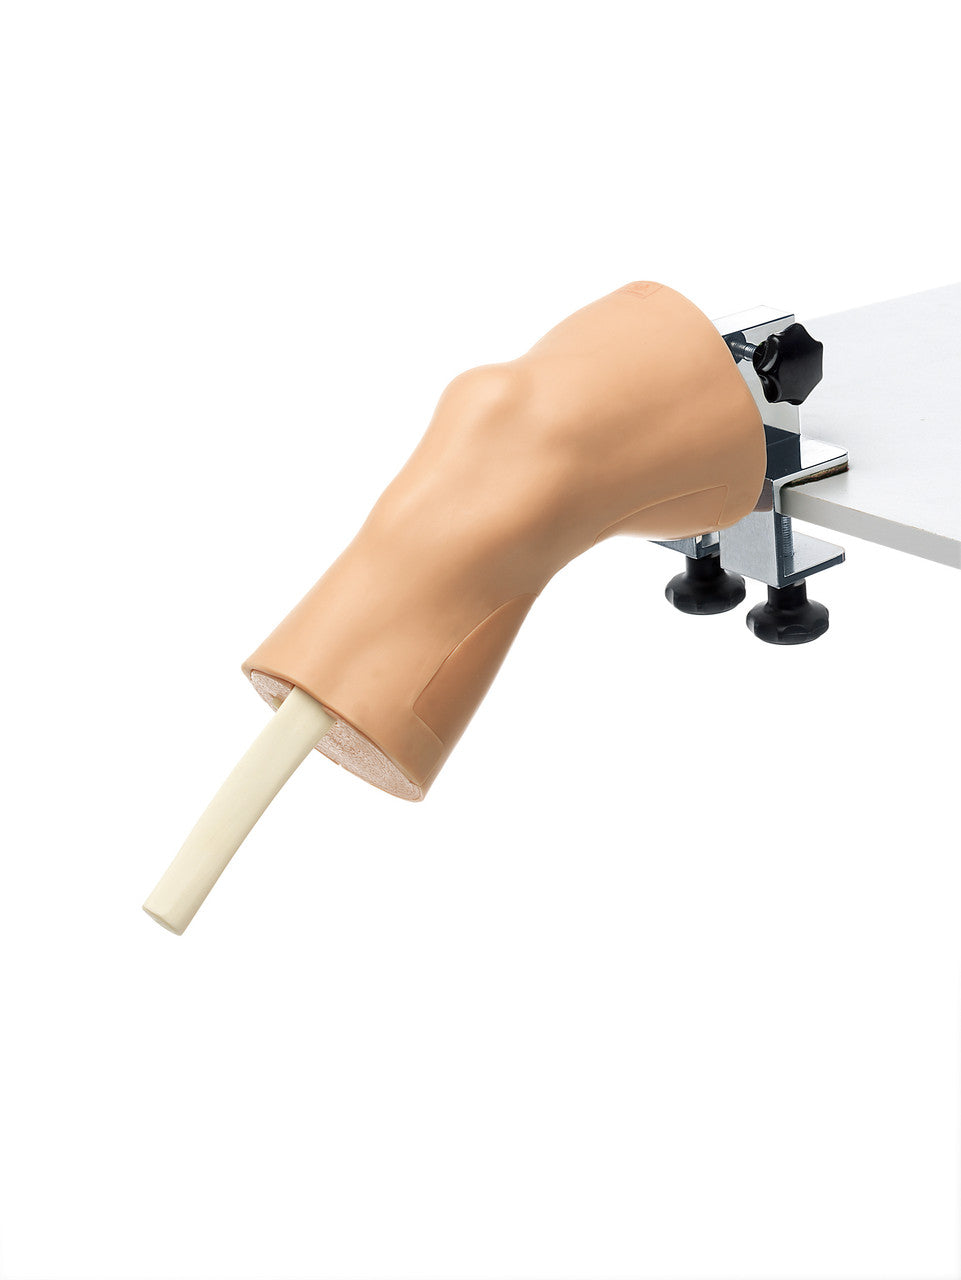 Arthroscopy Model of the Knee-Joint - mounted